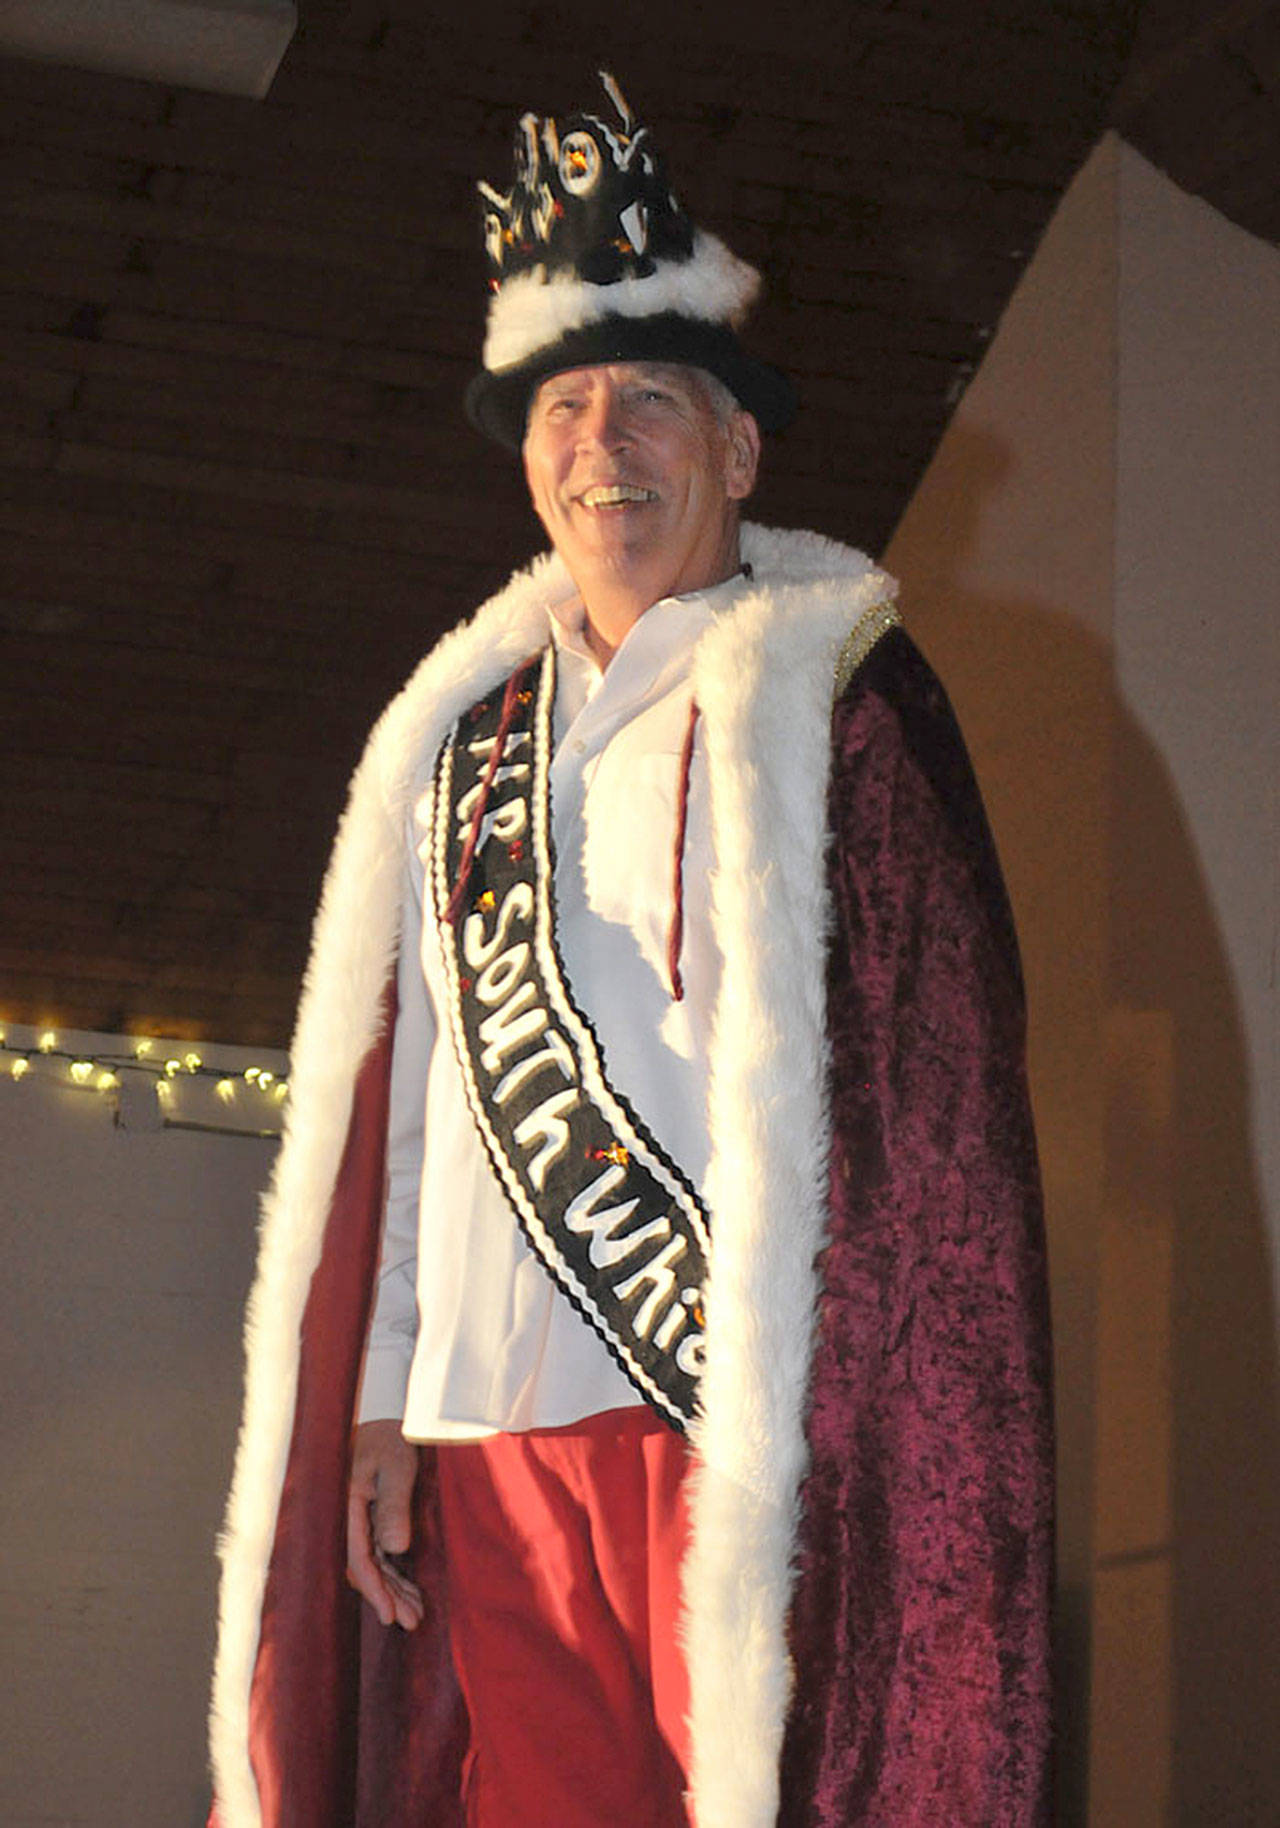 Don Miller (Delicate Light Photography) photo — Daniel Goldsmith, a 71-year-old Freeland resident, won the Mr. South Whidbey crown on Saturday night at Freeland Hall.